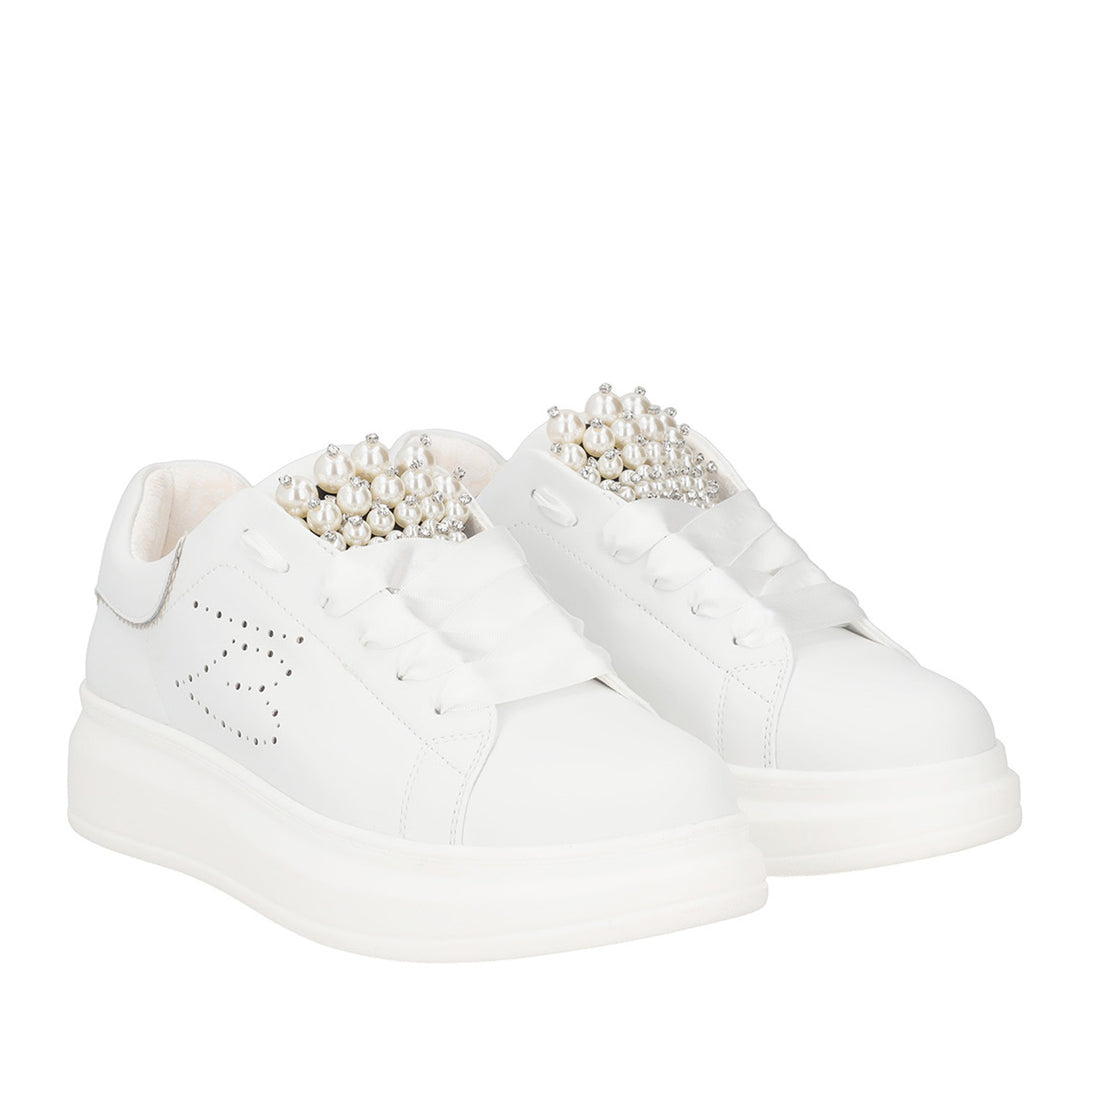 WHITE GLAMOUR SNEAKER IN LEATHER WITH PEARLS